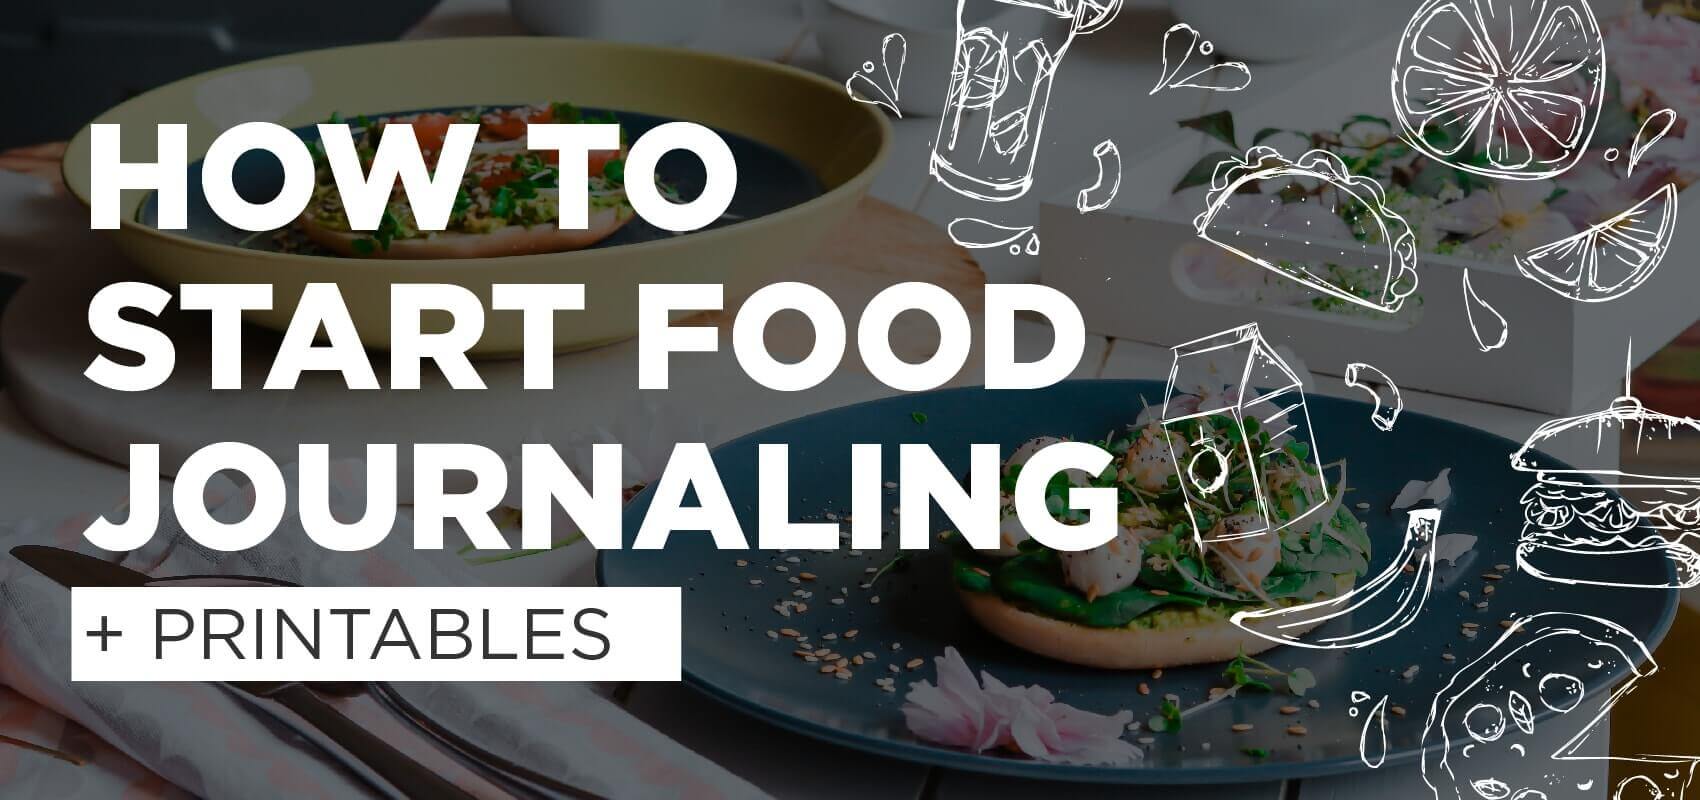 How To Start Food Journaling